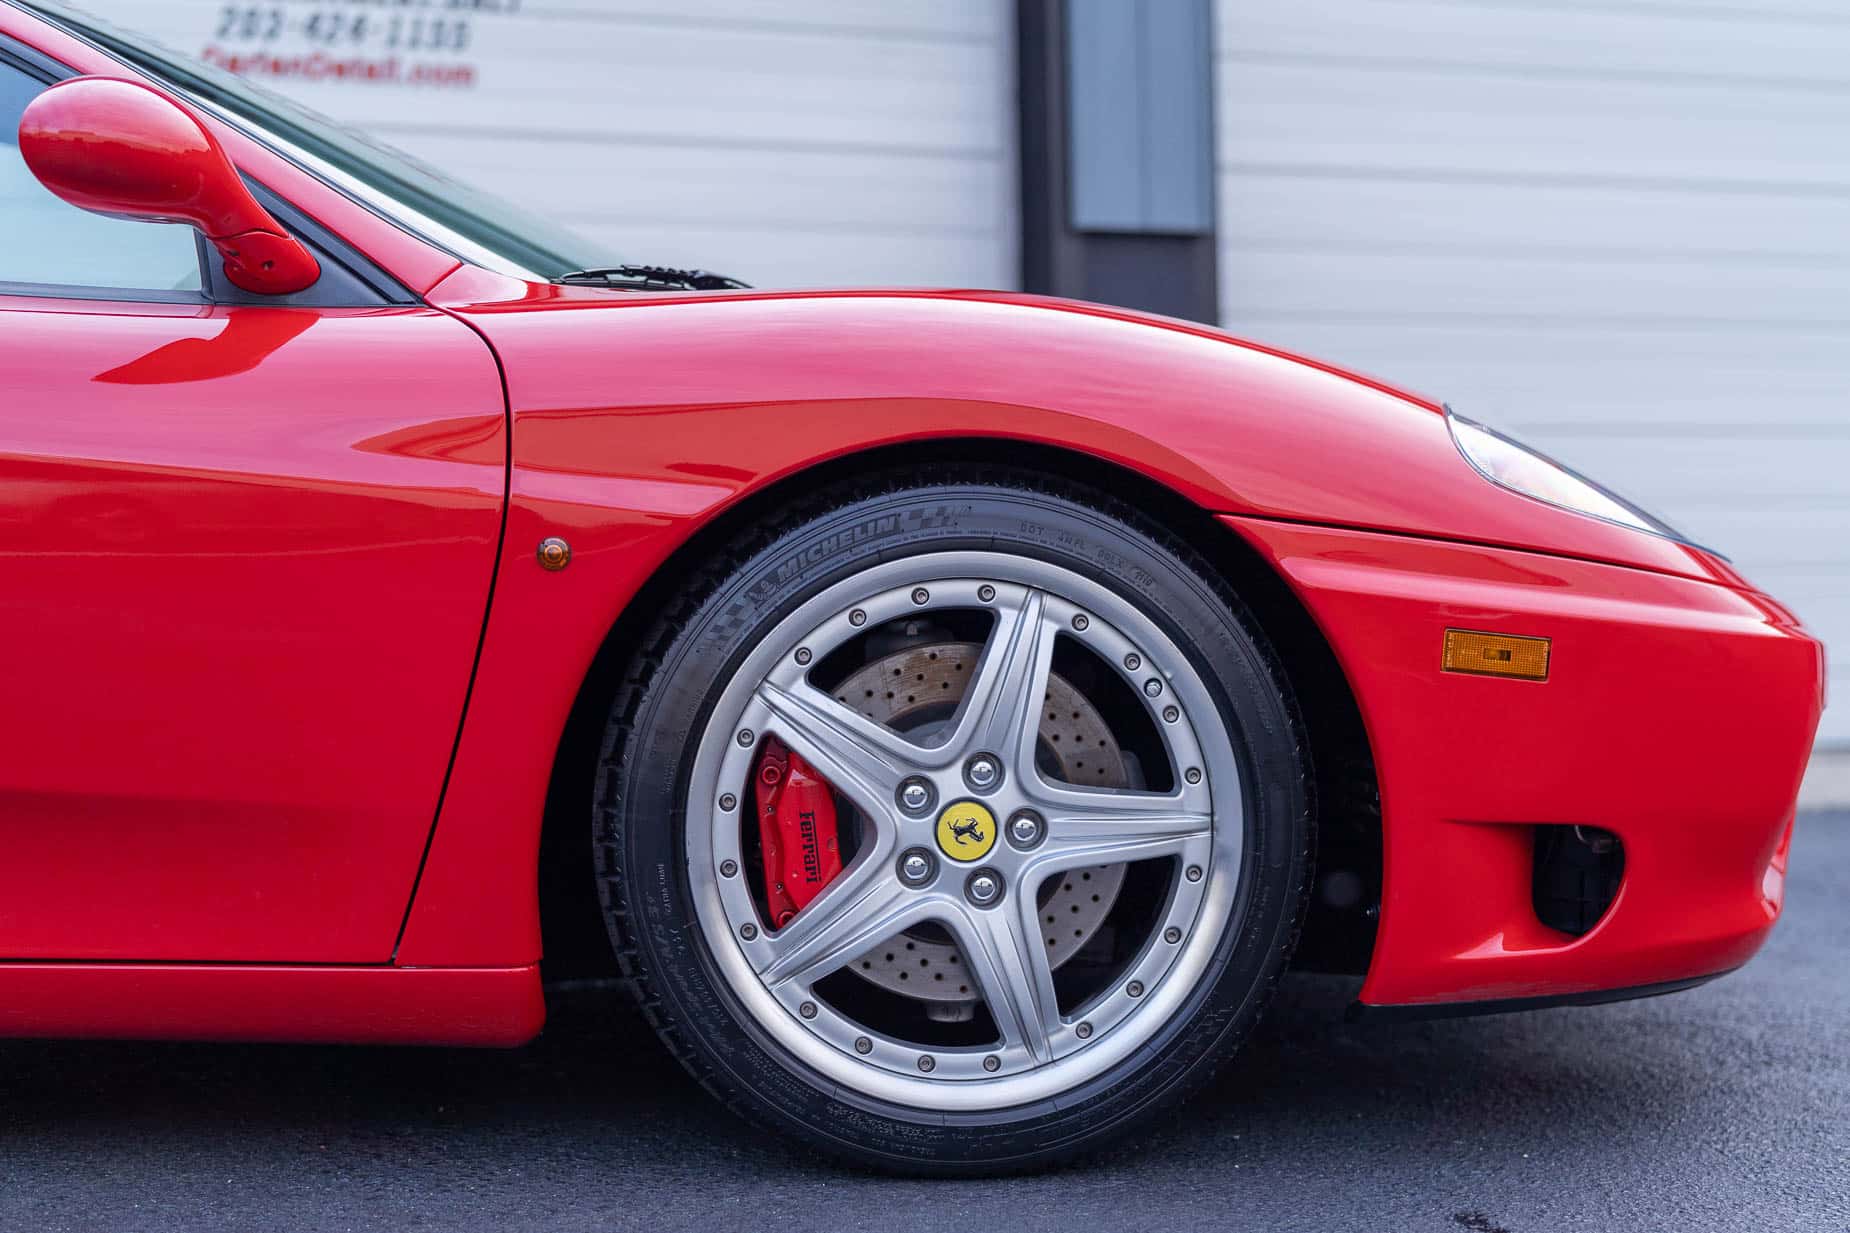 2003 Ferrari 360 Spider Rosso Corsa 3 Piece Wheels Red Calipers Convertiblexpel Paint Protection Film Ppf Ceramic Coating 04